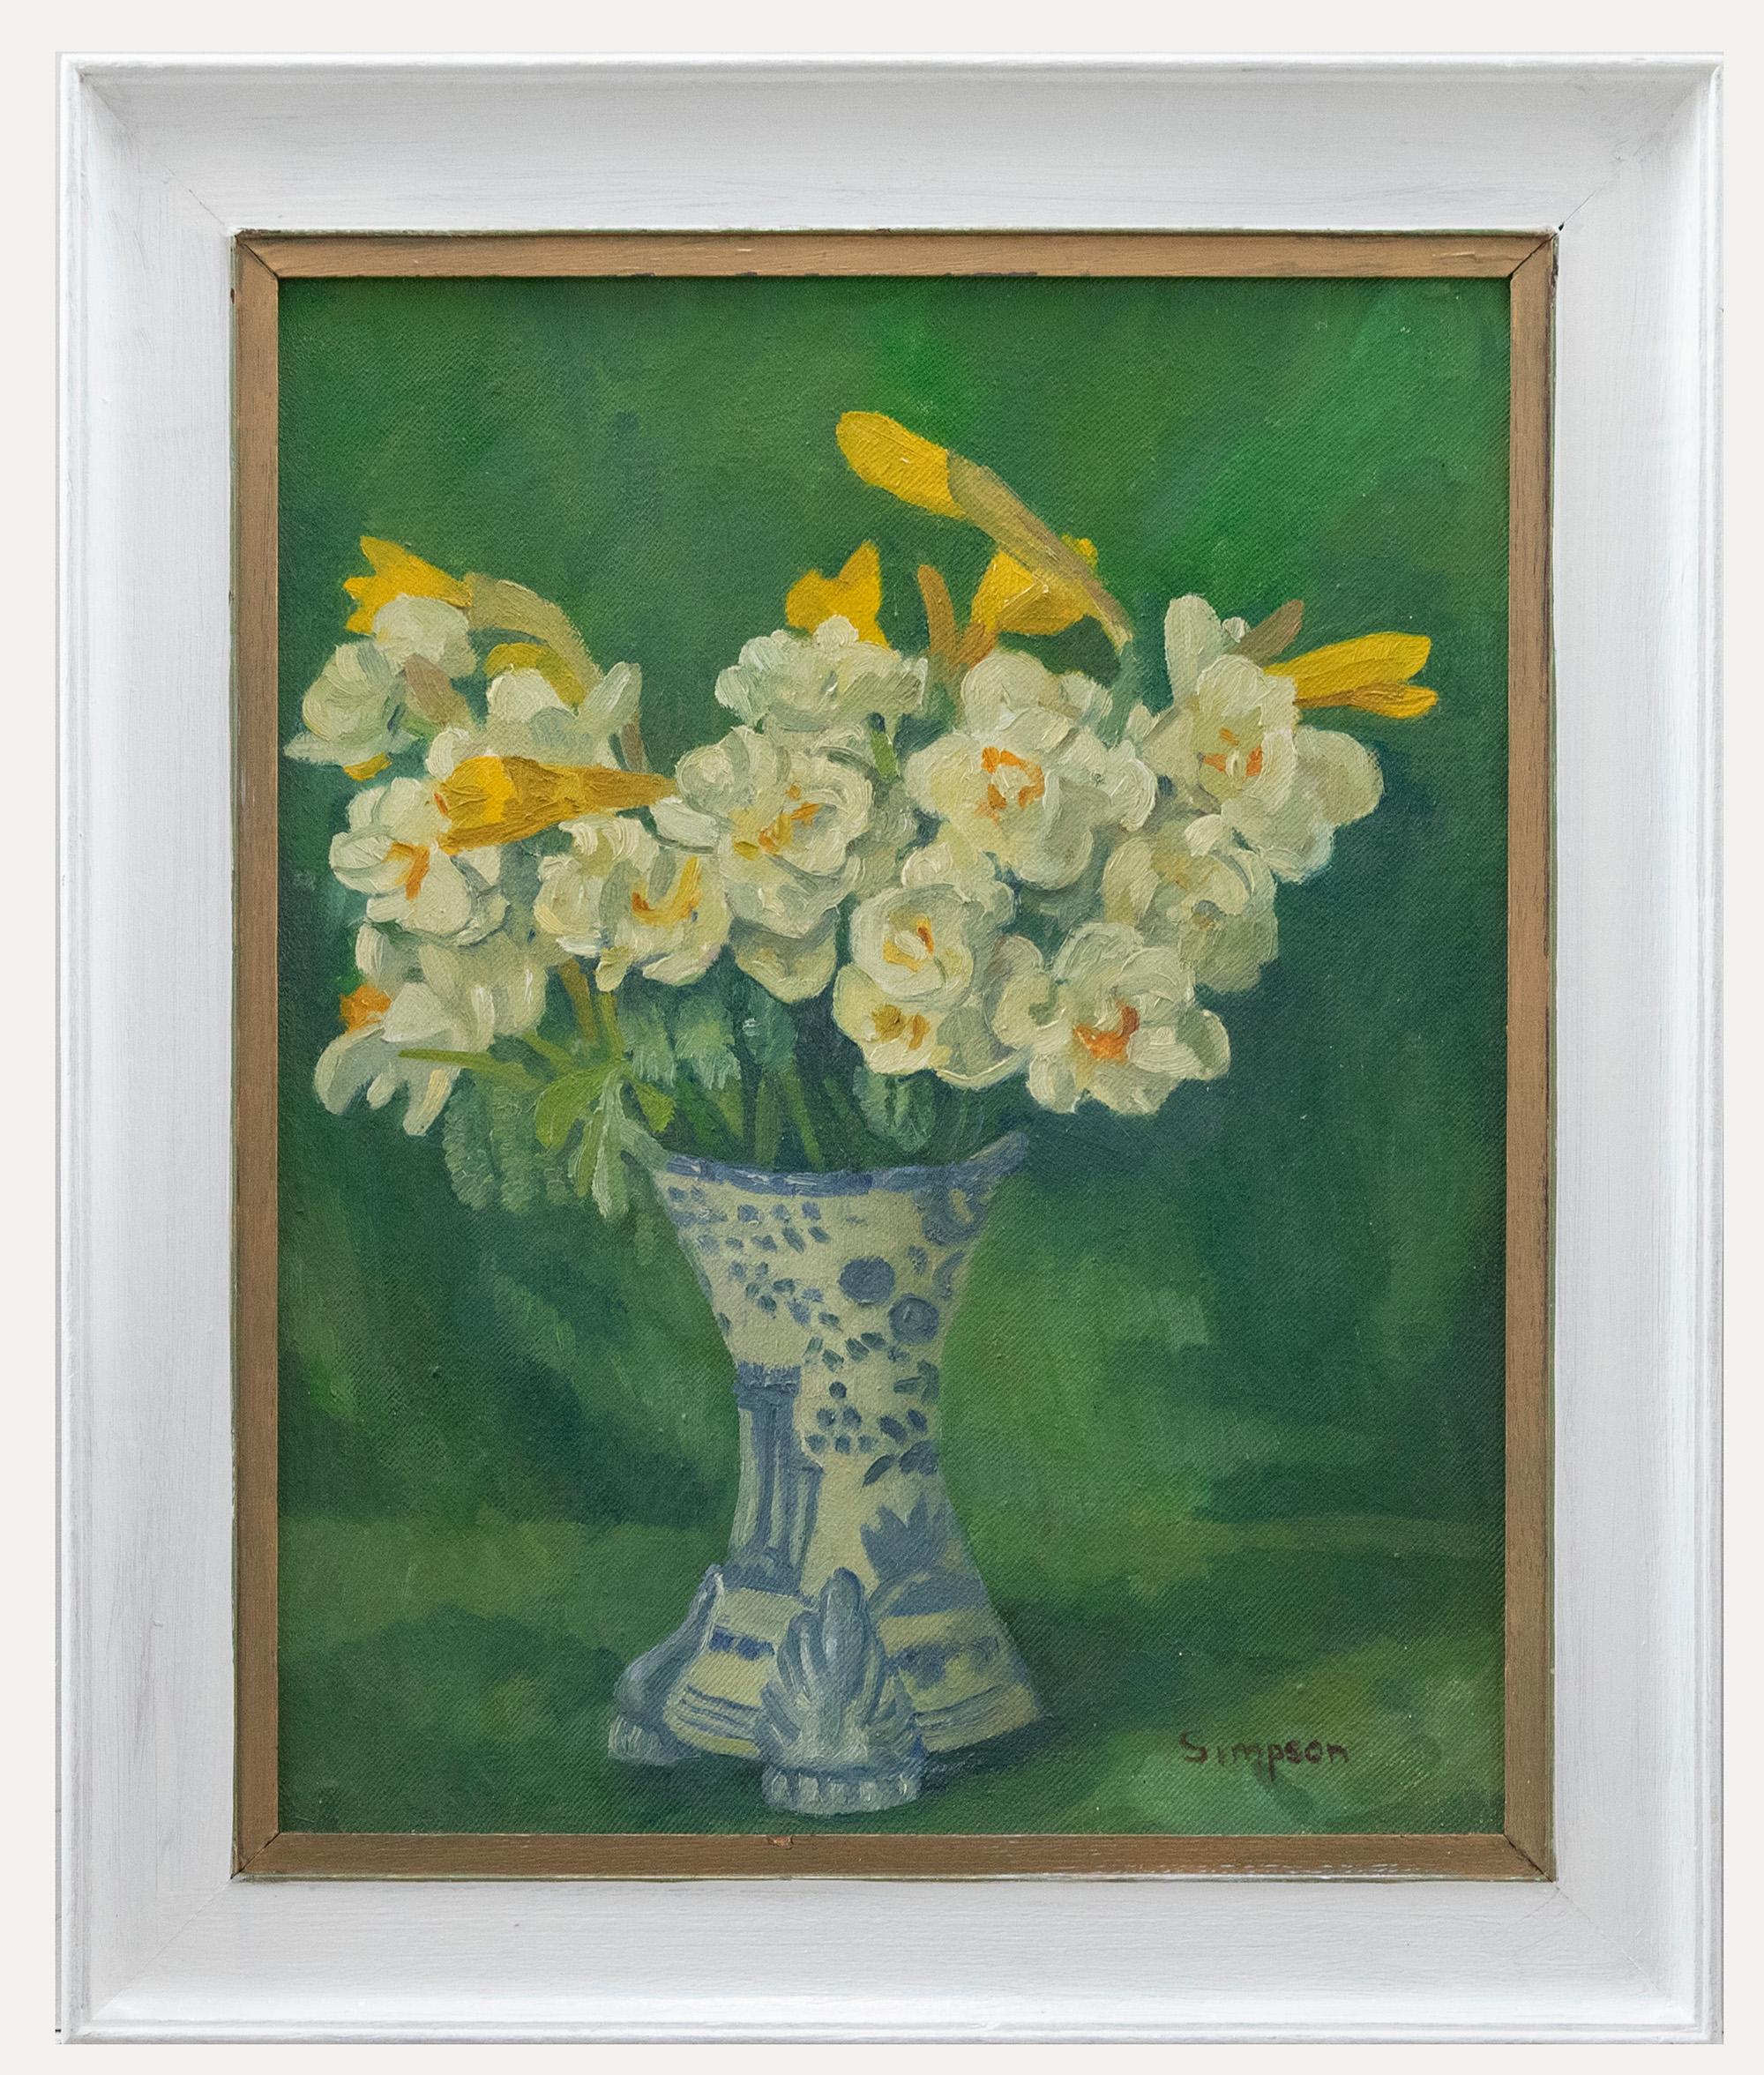 Unknown Still-Life Painting - J. Simpson - Contemporary Oil, Daffodils in Ceramic Vase